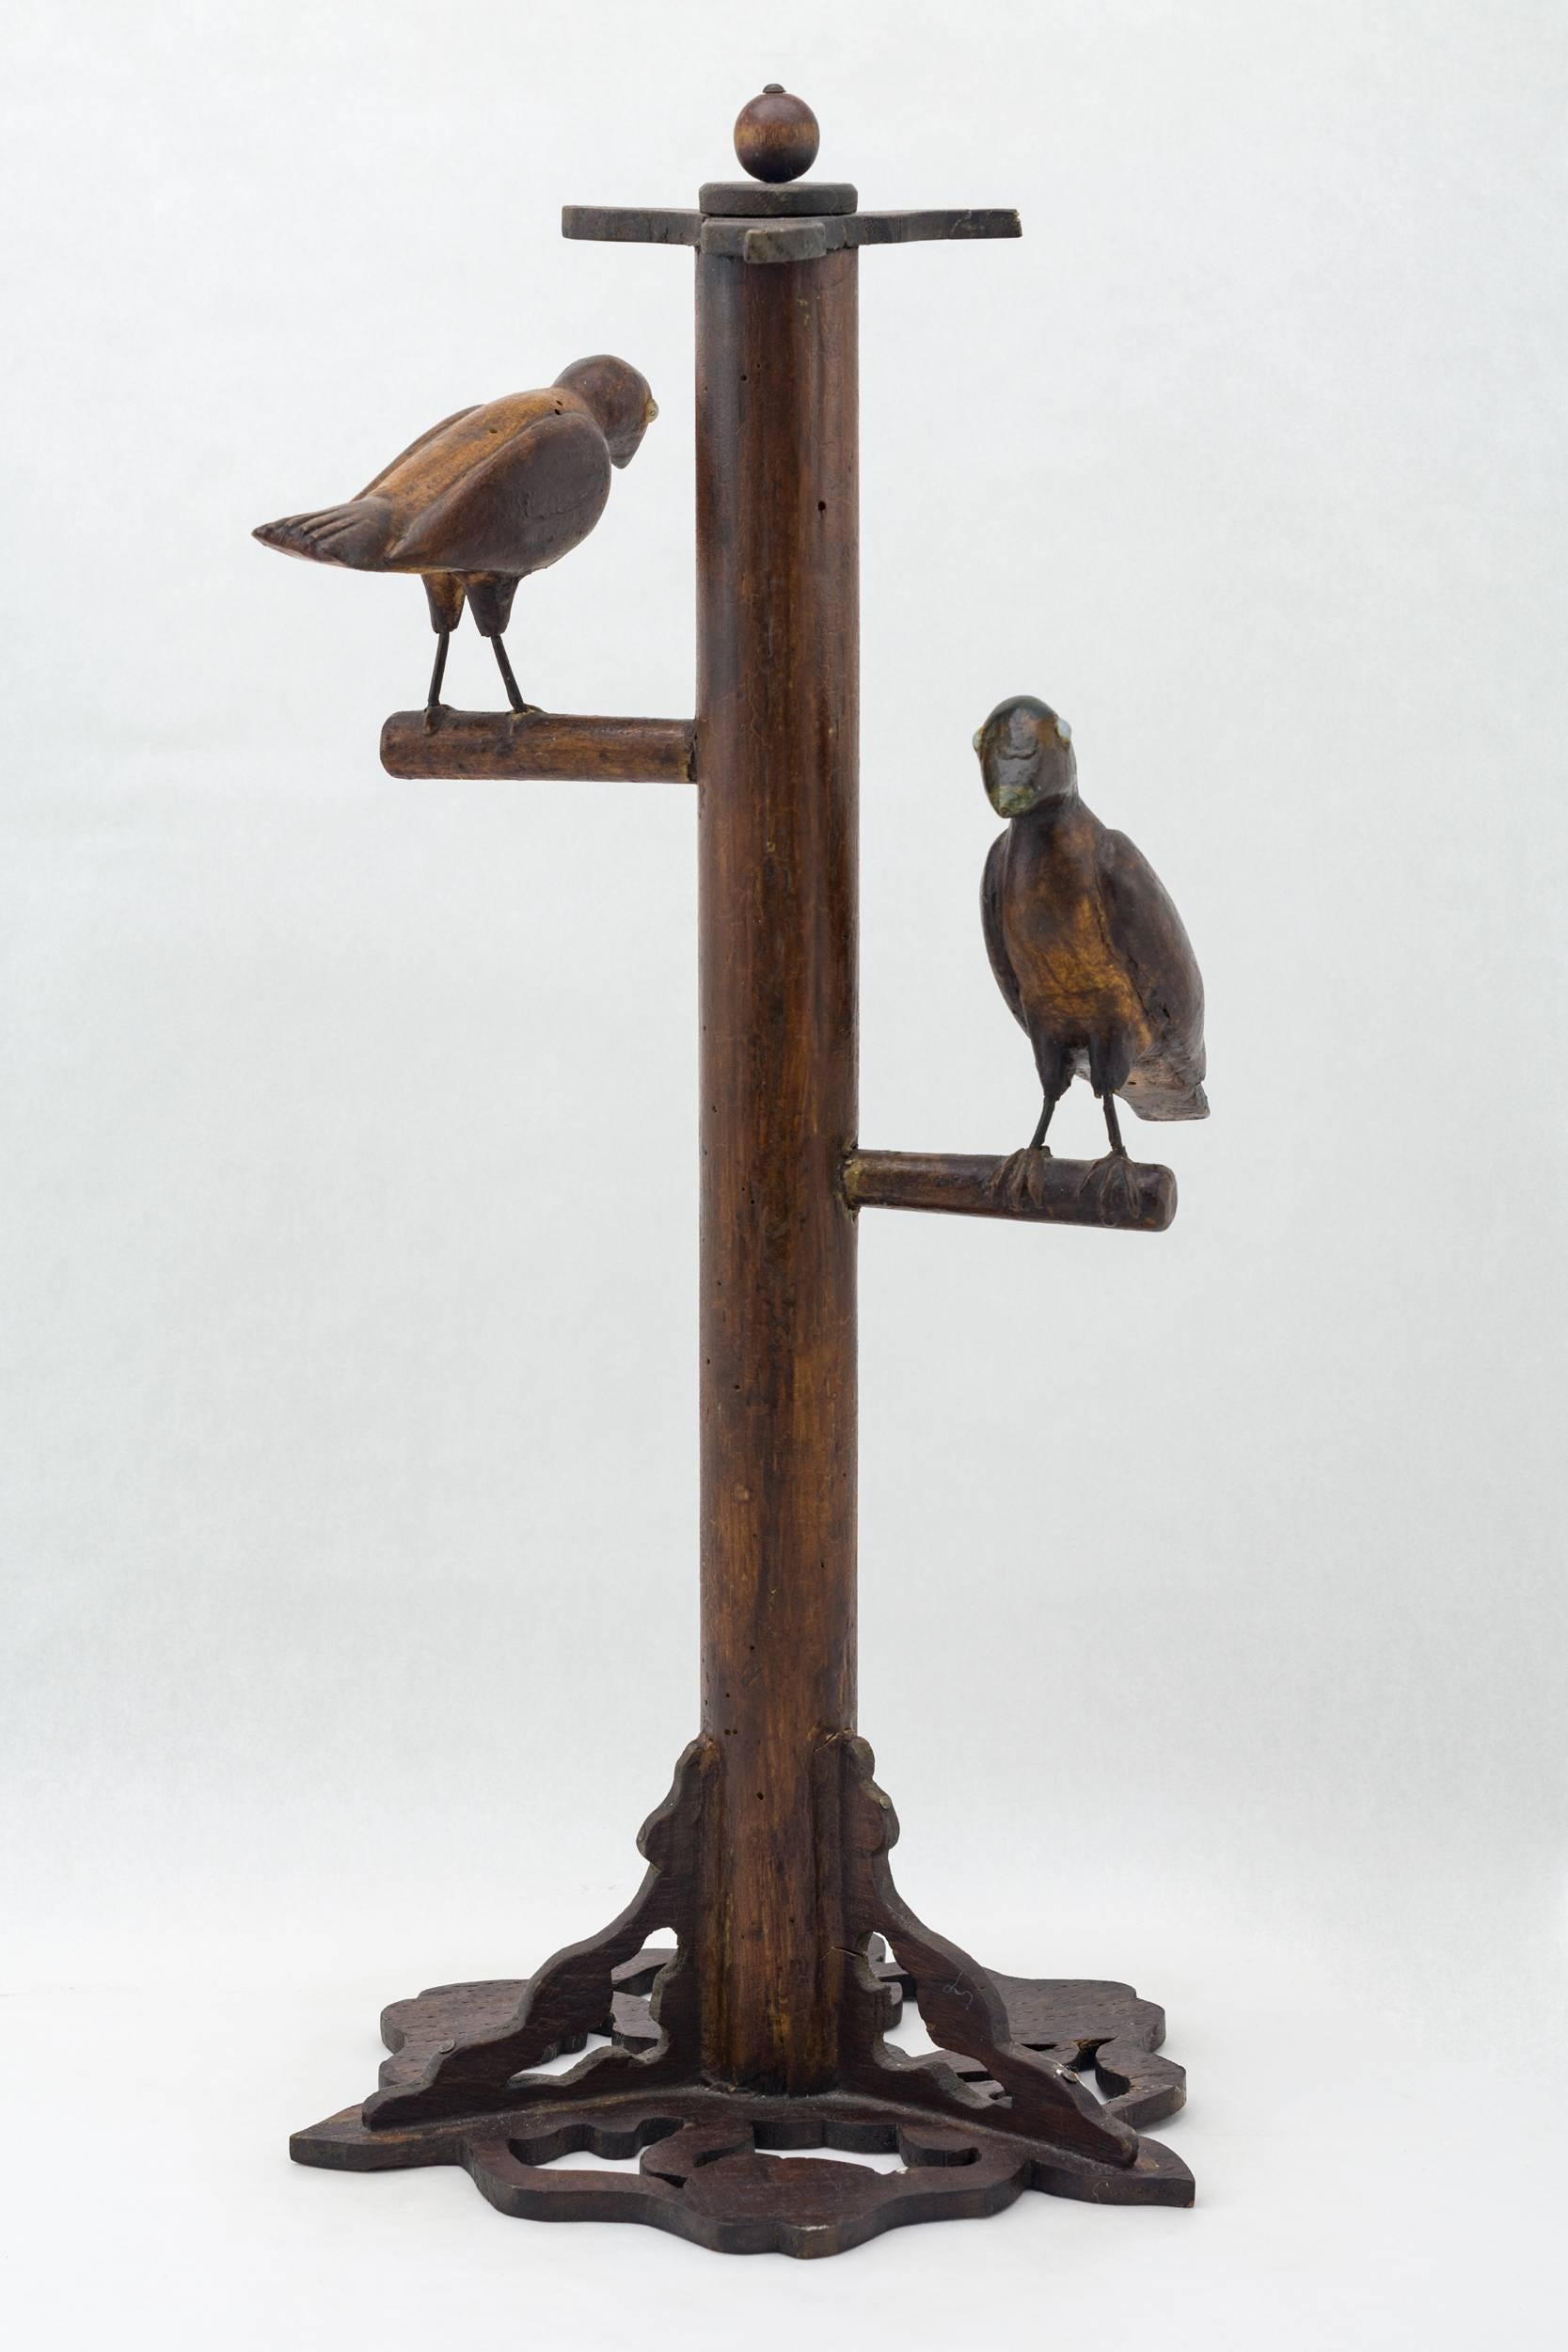 Birds are finely carved with raised wings, wired legs and white glass eyes
the perch has a pierced scrolled base and top. Made of Pine with painted beaks
and stain.